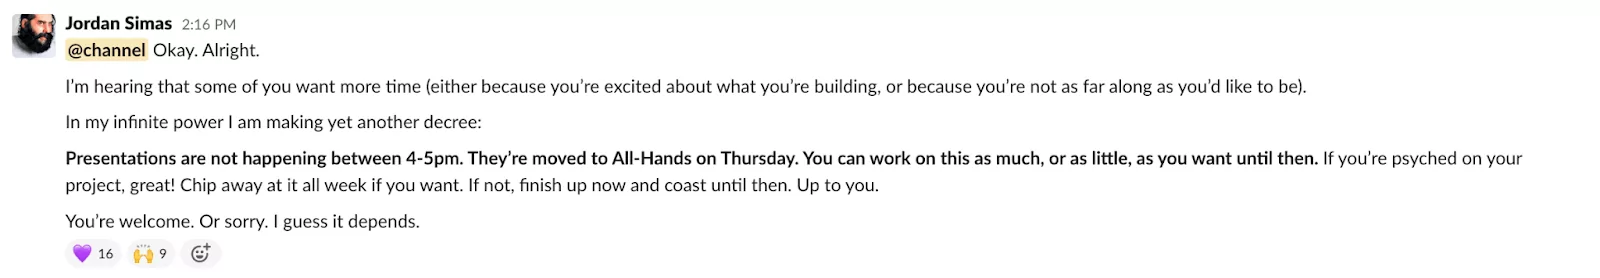 Communicating an update to the retreat itinerary in Slack